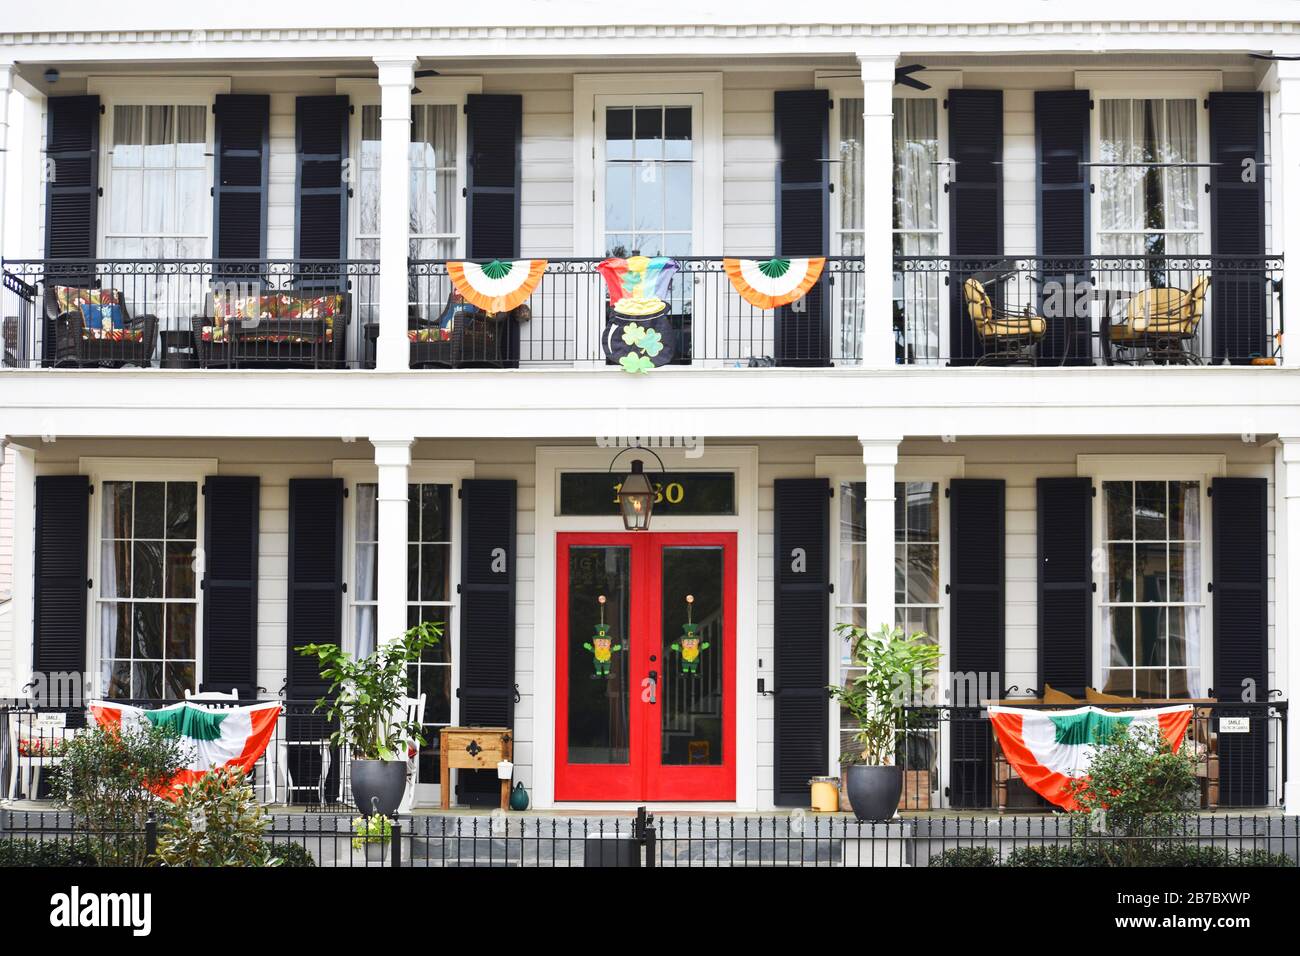 New Orleans St Patricks Day Houses and businesses decorated for March 17th Stock Photo